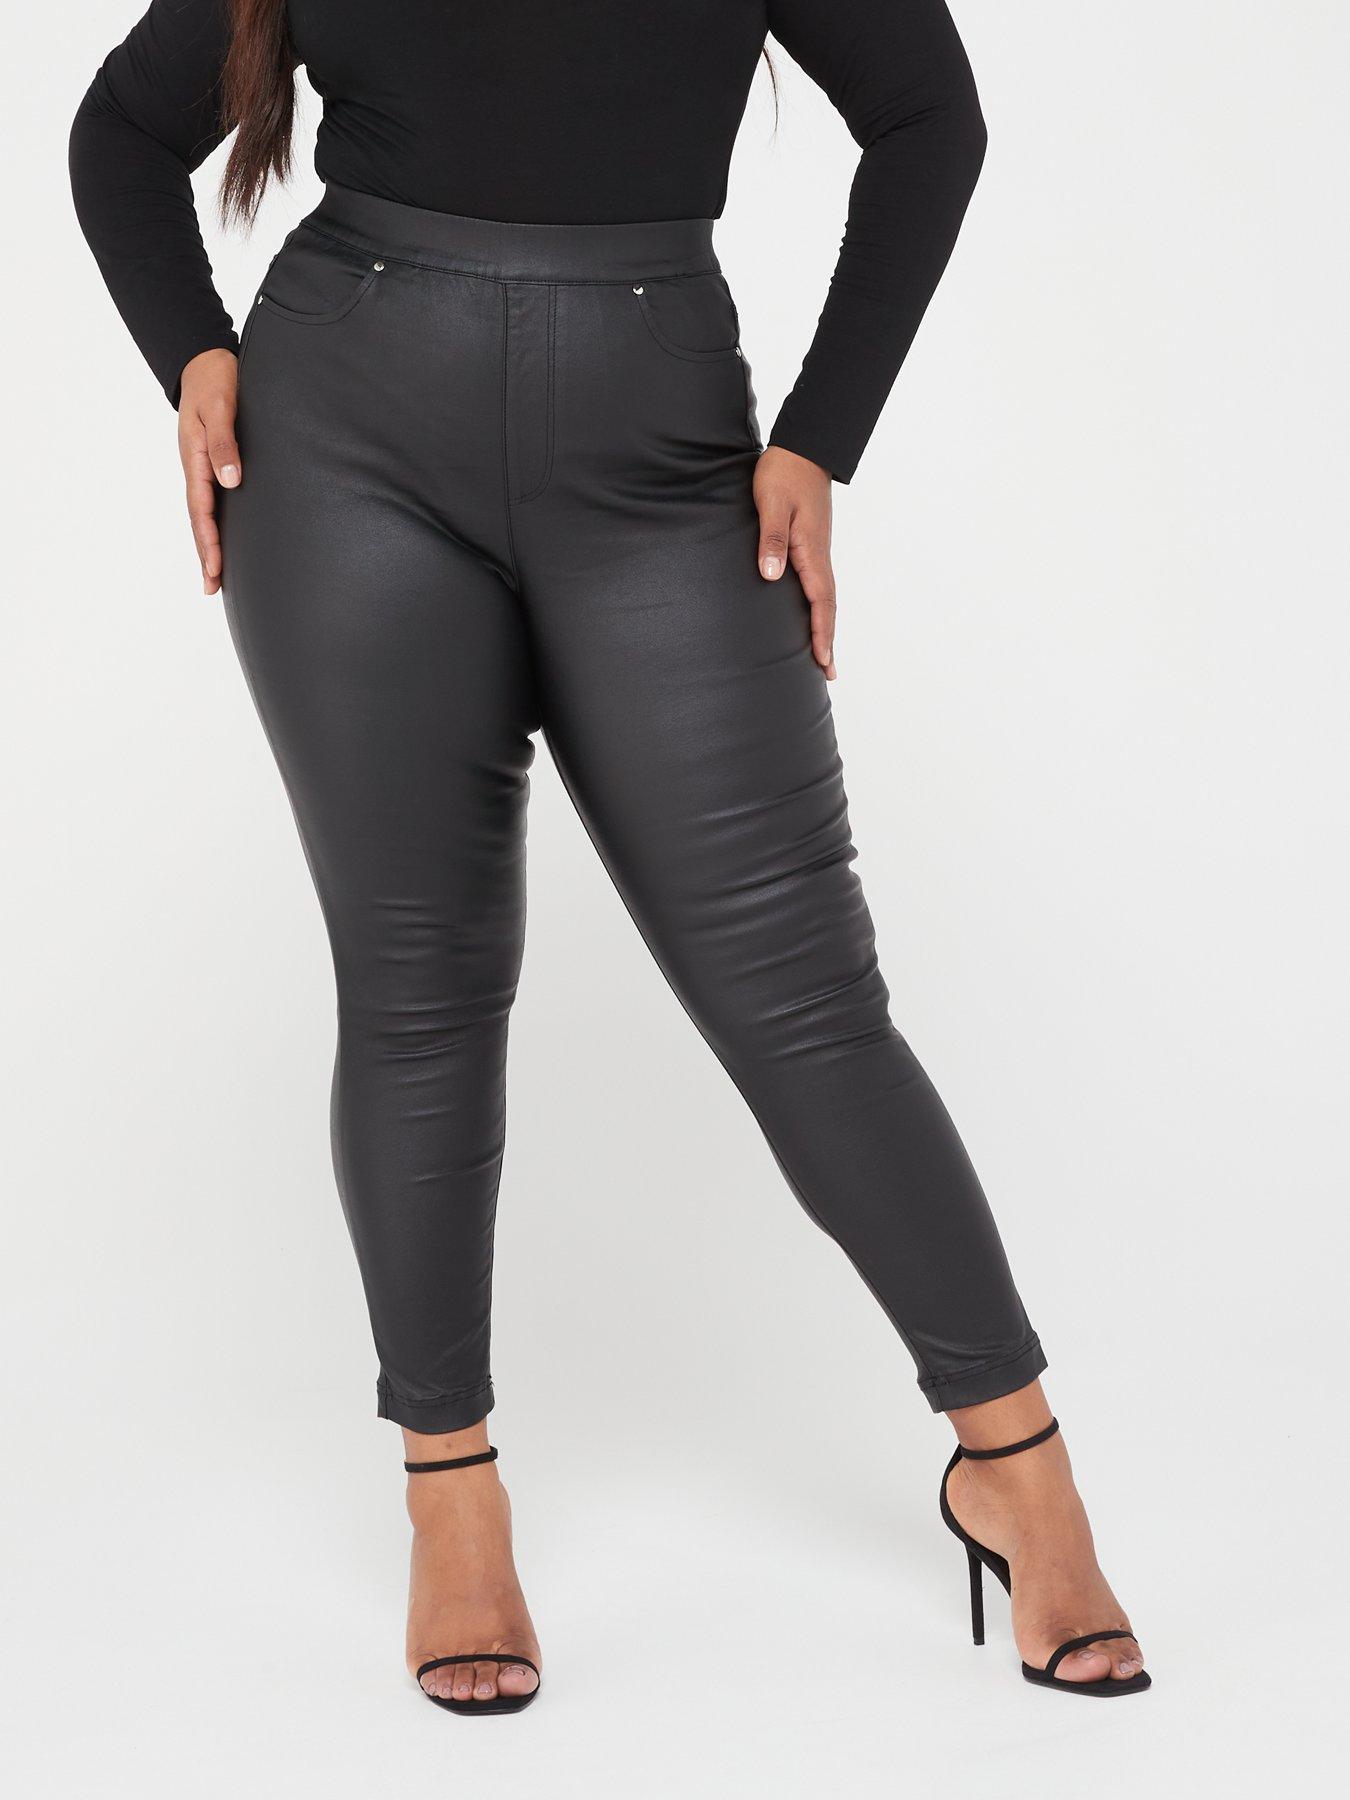 New Look Curves Black Coated Leather-Look Mid Rise Lift & Shape